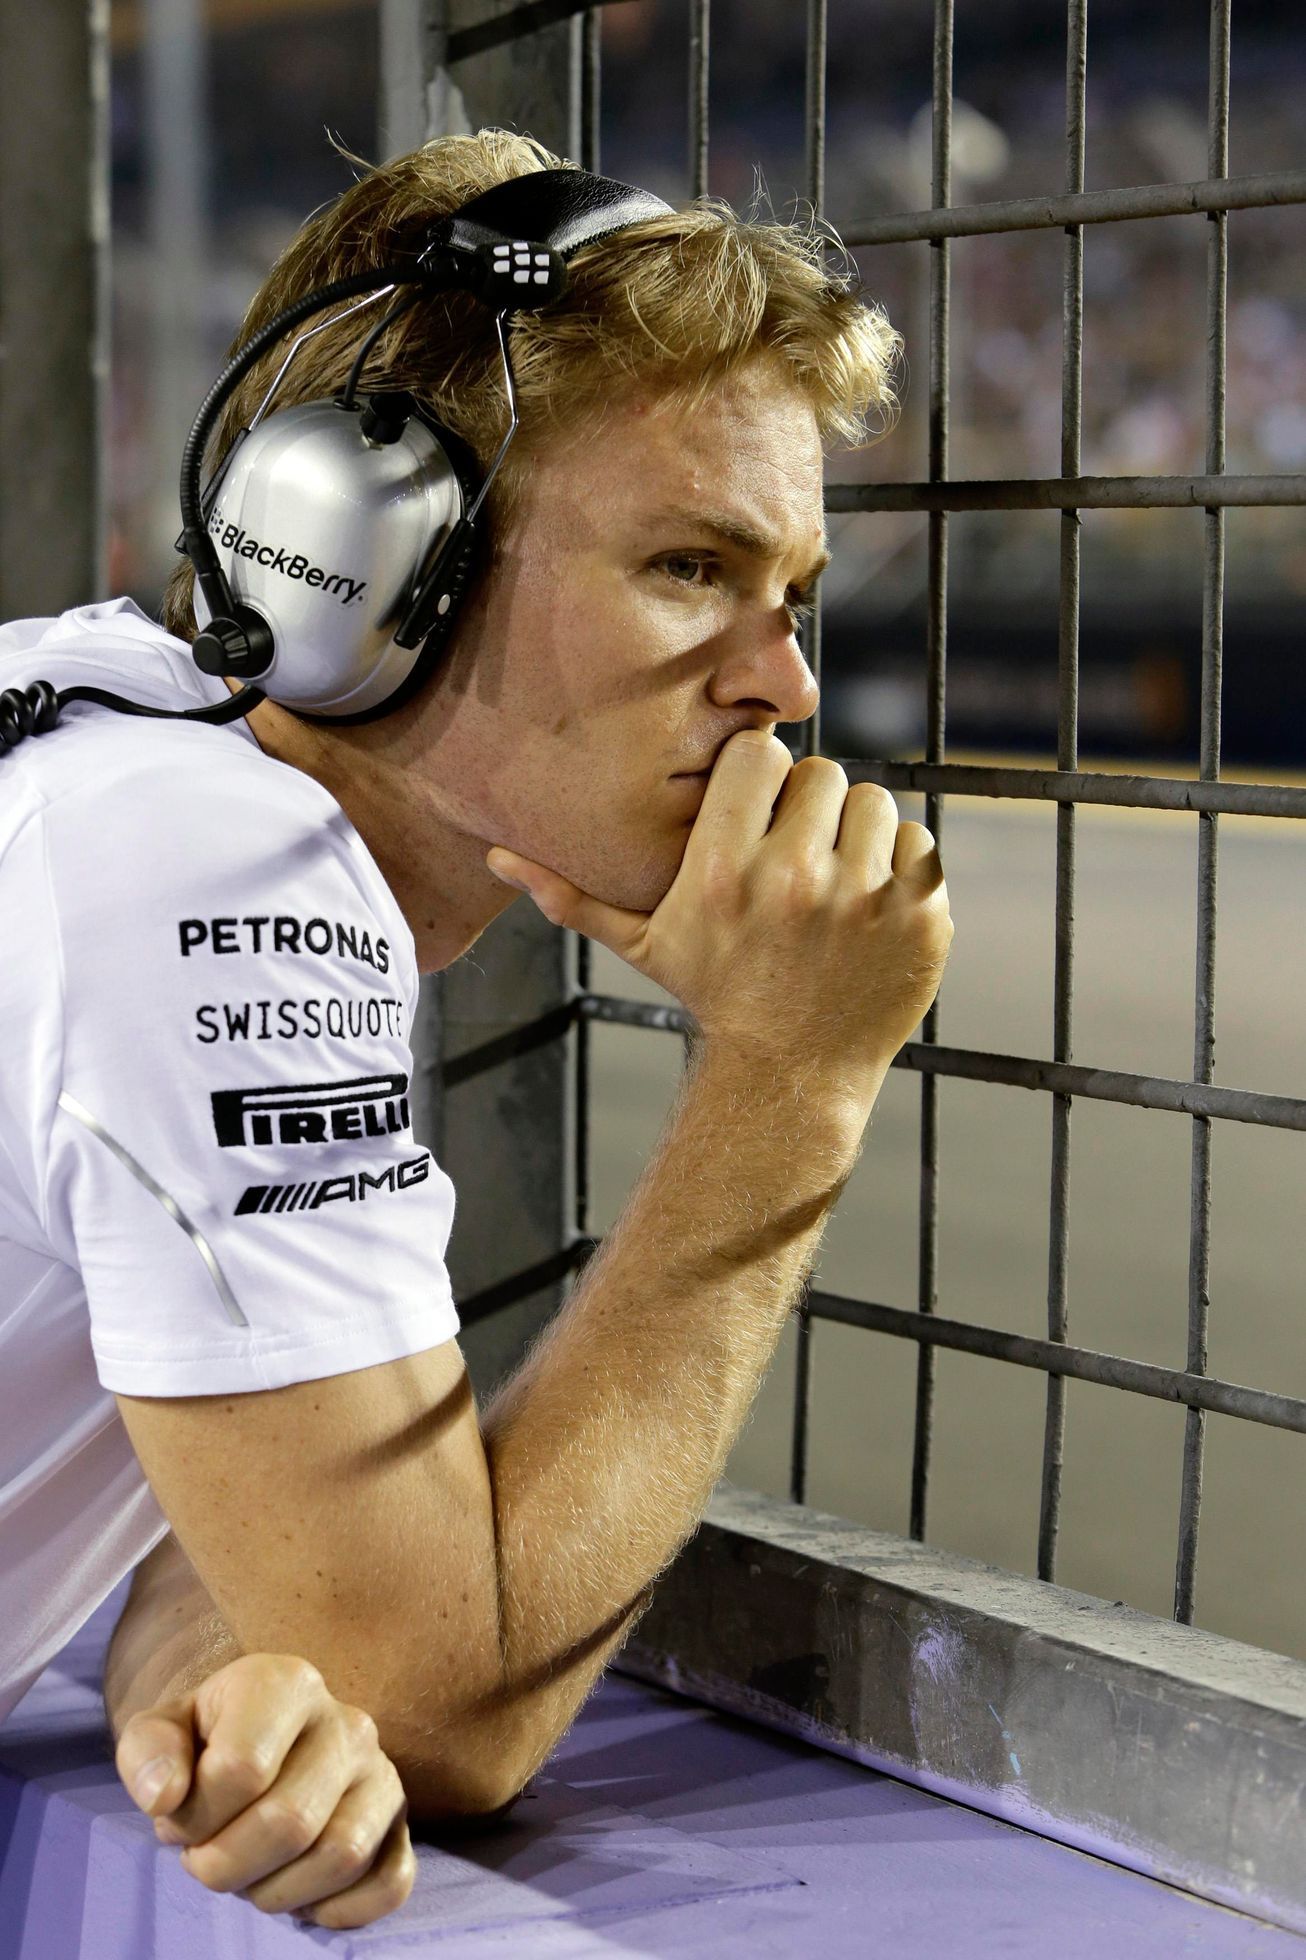 Mercedes Formula One driver Rosberg of Germany watches the race from the pitwall during the Singapore F1 Grand Prix in Singapore